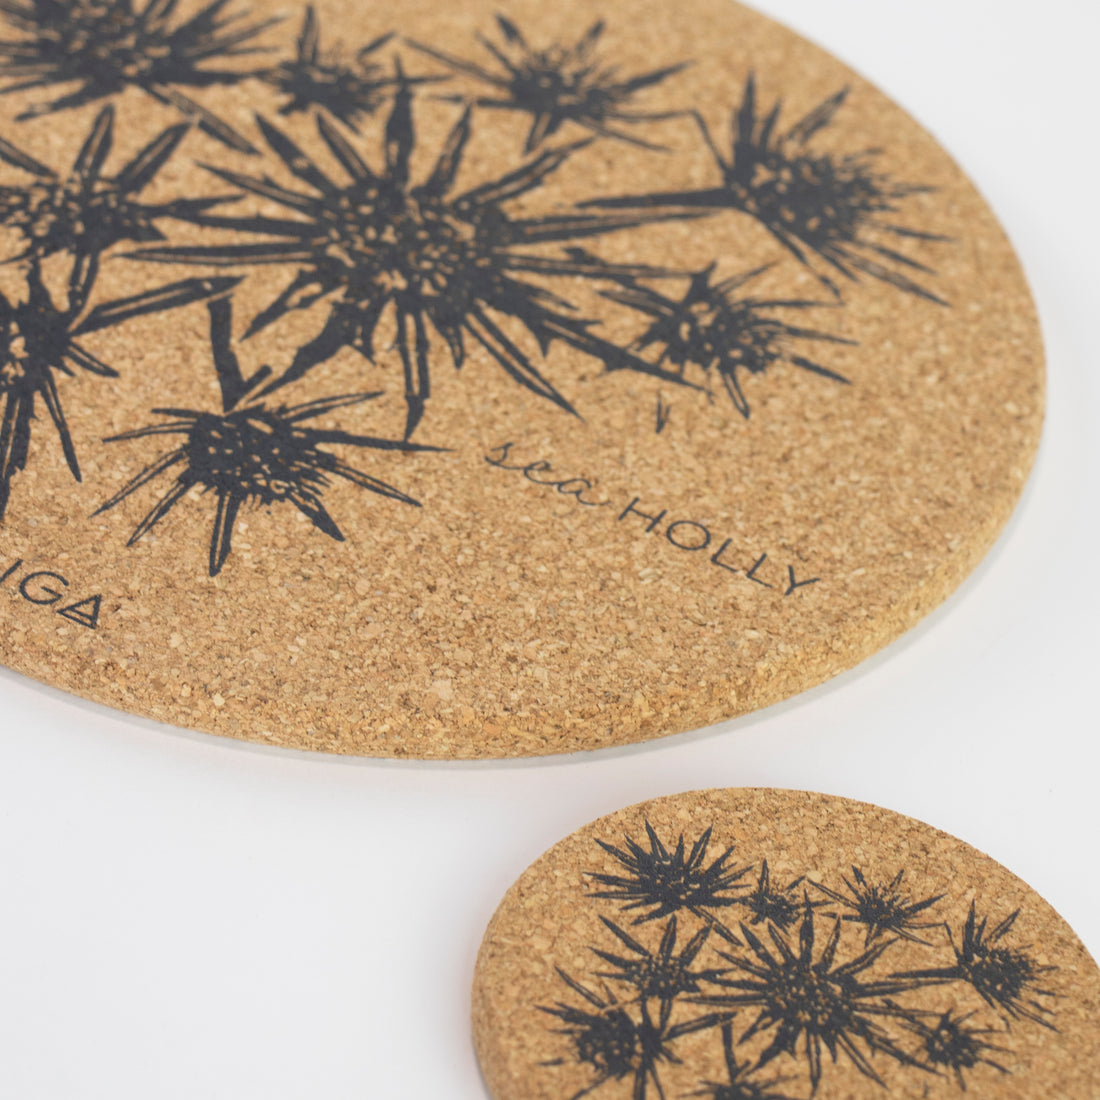 Sustainable cork placemat and coaster. Sea holly design